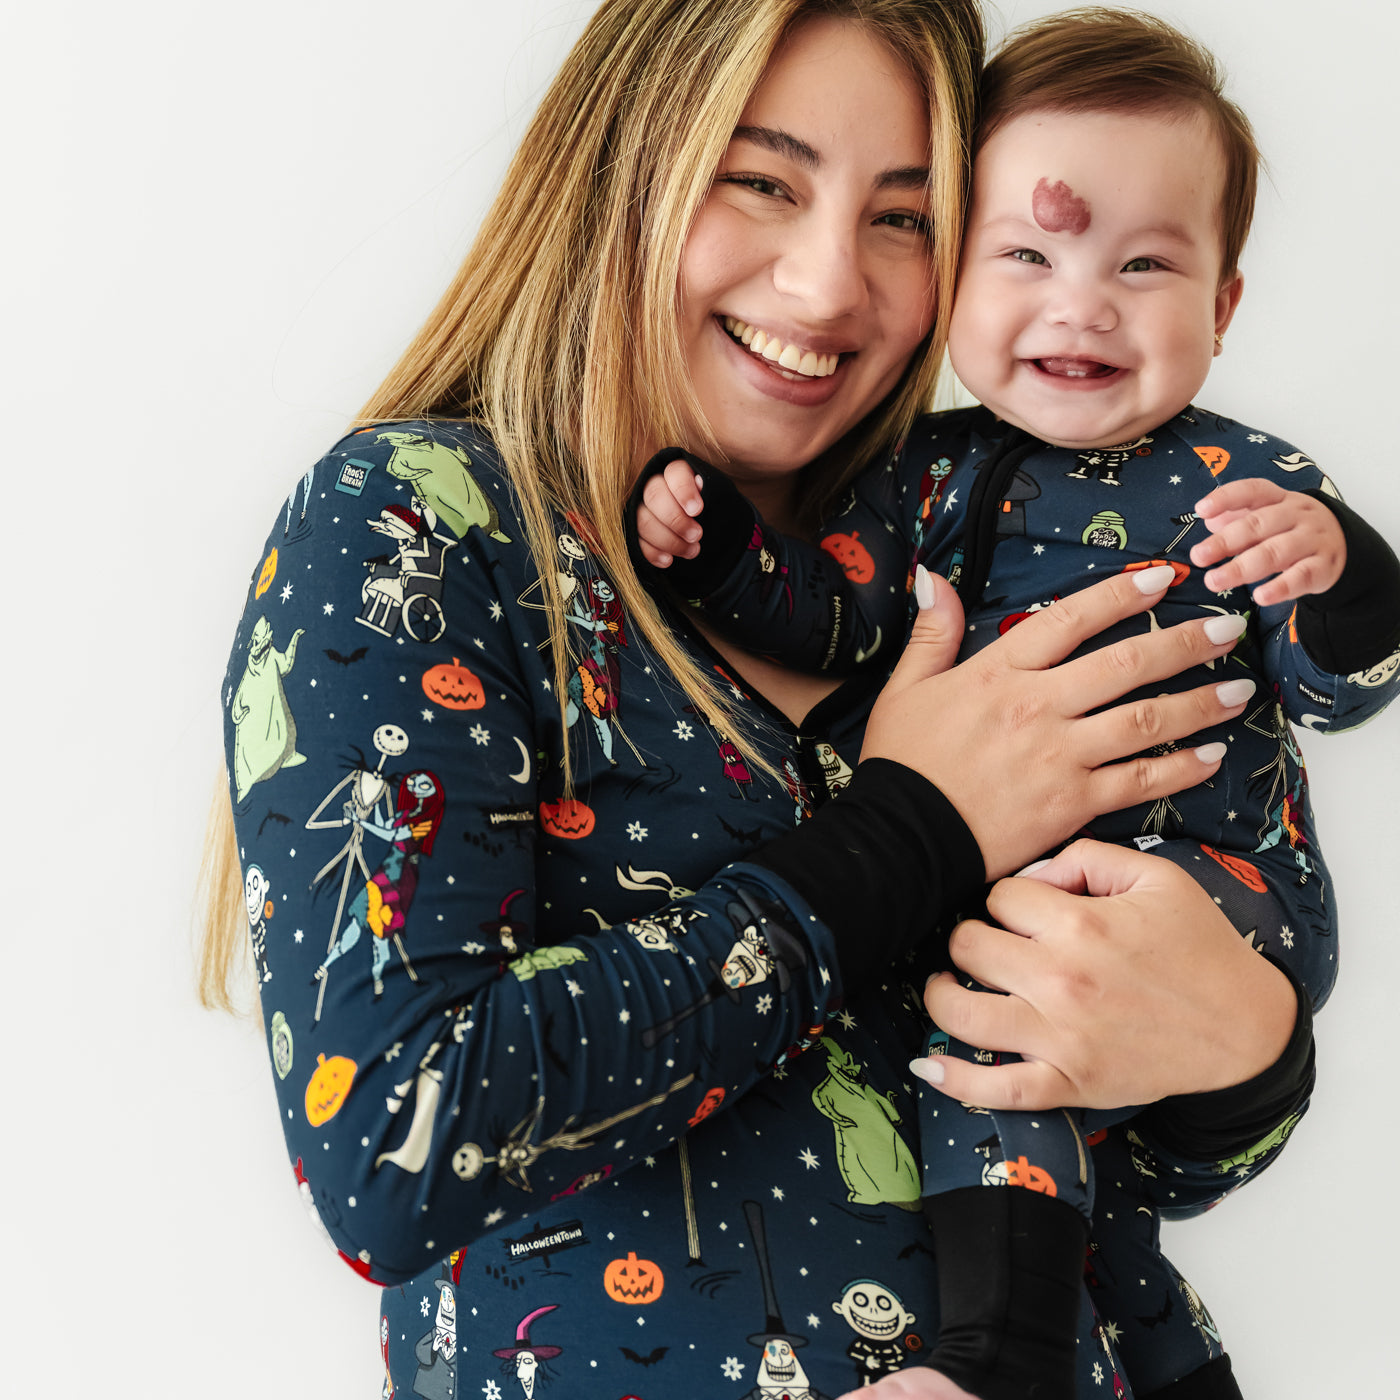 Woman and child wearing matching Jack Skellington and Friends printed pajamas